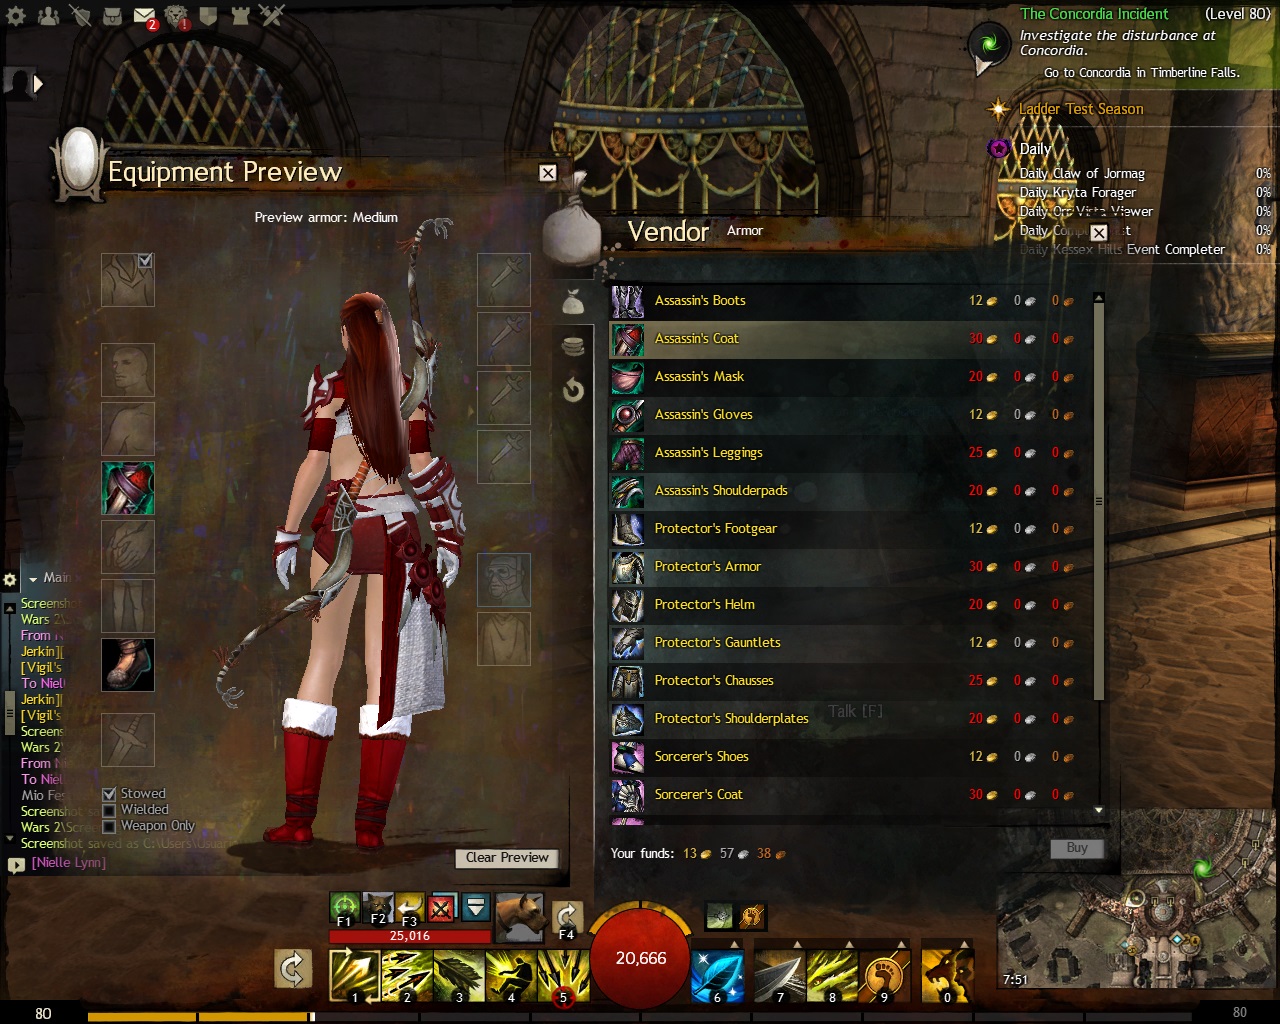 Guild Wars 2 - Assassin's Coat with Skirt and Seeker Boots - 04 - Back